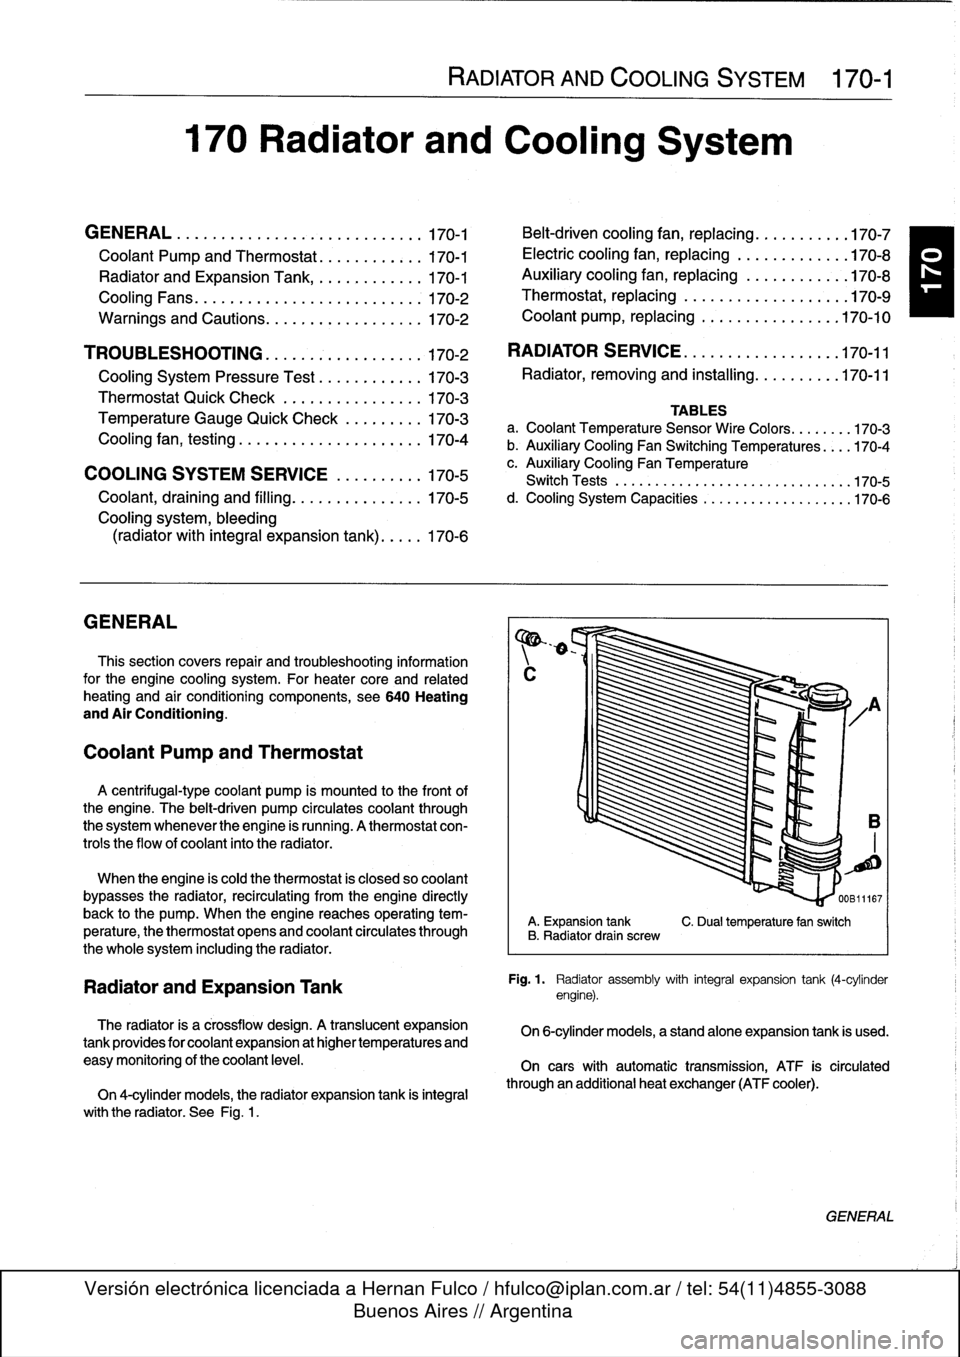 BMW 325i 1992 E36 Workshop Manual 170
Radiator
and
Cooling
System

GENERAL
.
.
.....
.
...
.
.
.
.
.
....
.
.
.
.
.
.
.
.170-1

Coolant
Pump
and
Thermostat
........
.
.
.
.
170-1

Radiator
and
Expansion
Tank
.........
.
...
170-1

Coo